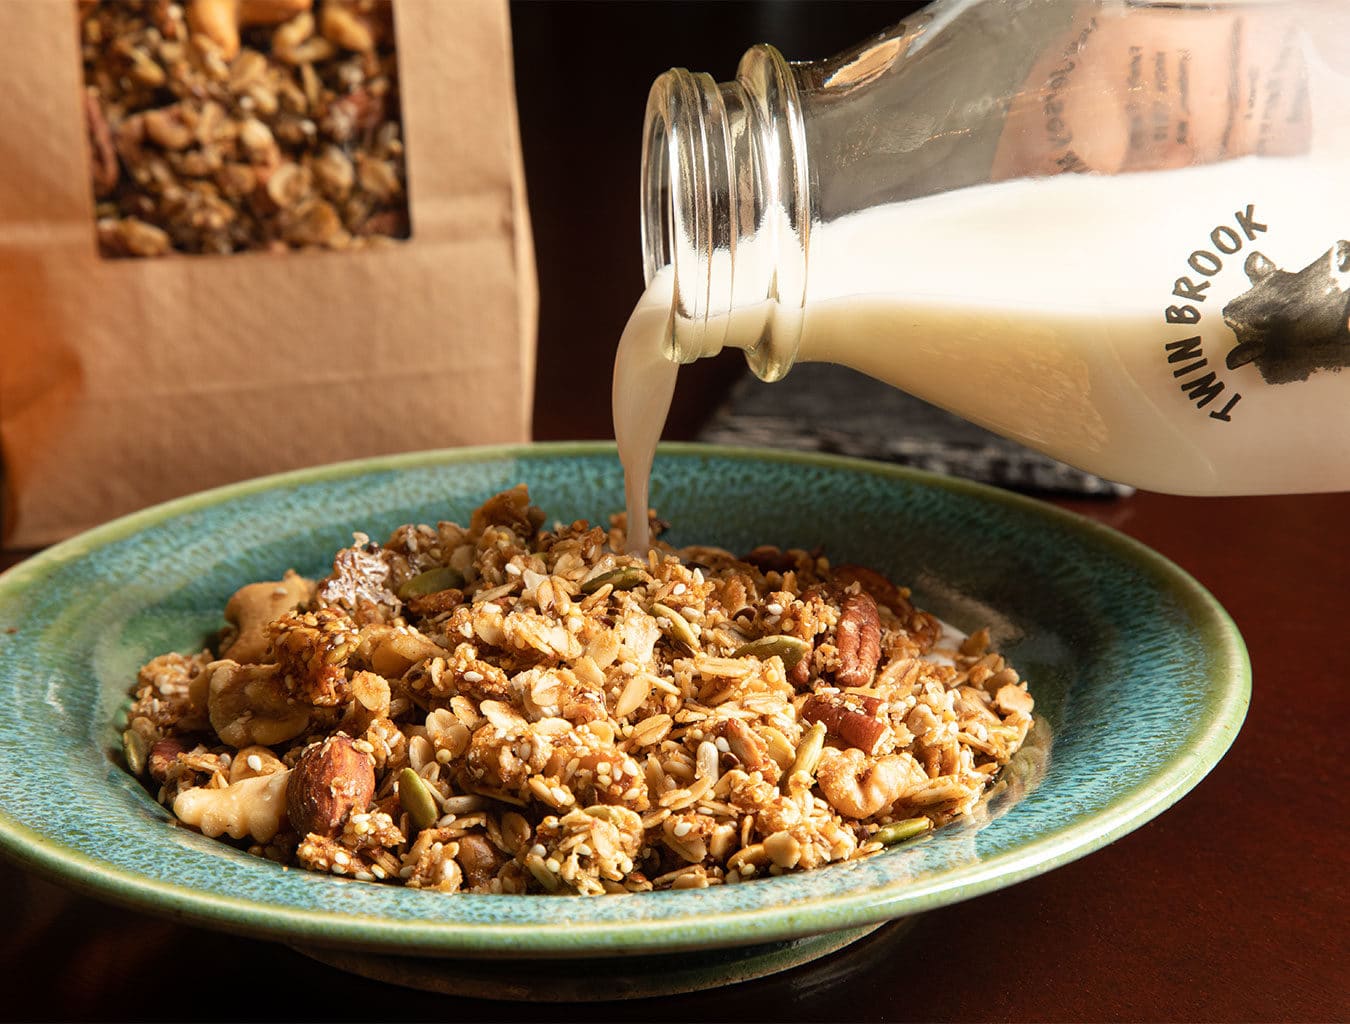 milk being poured from a bottle into a bowl of granola